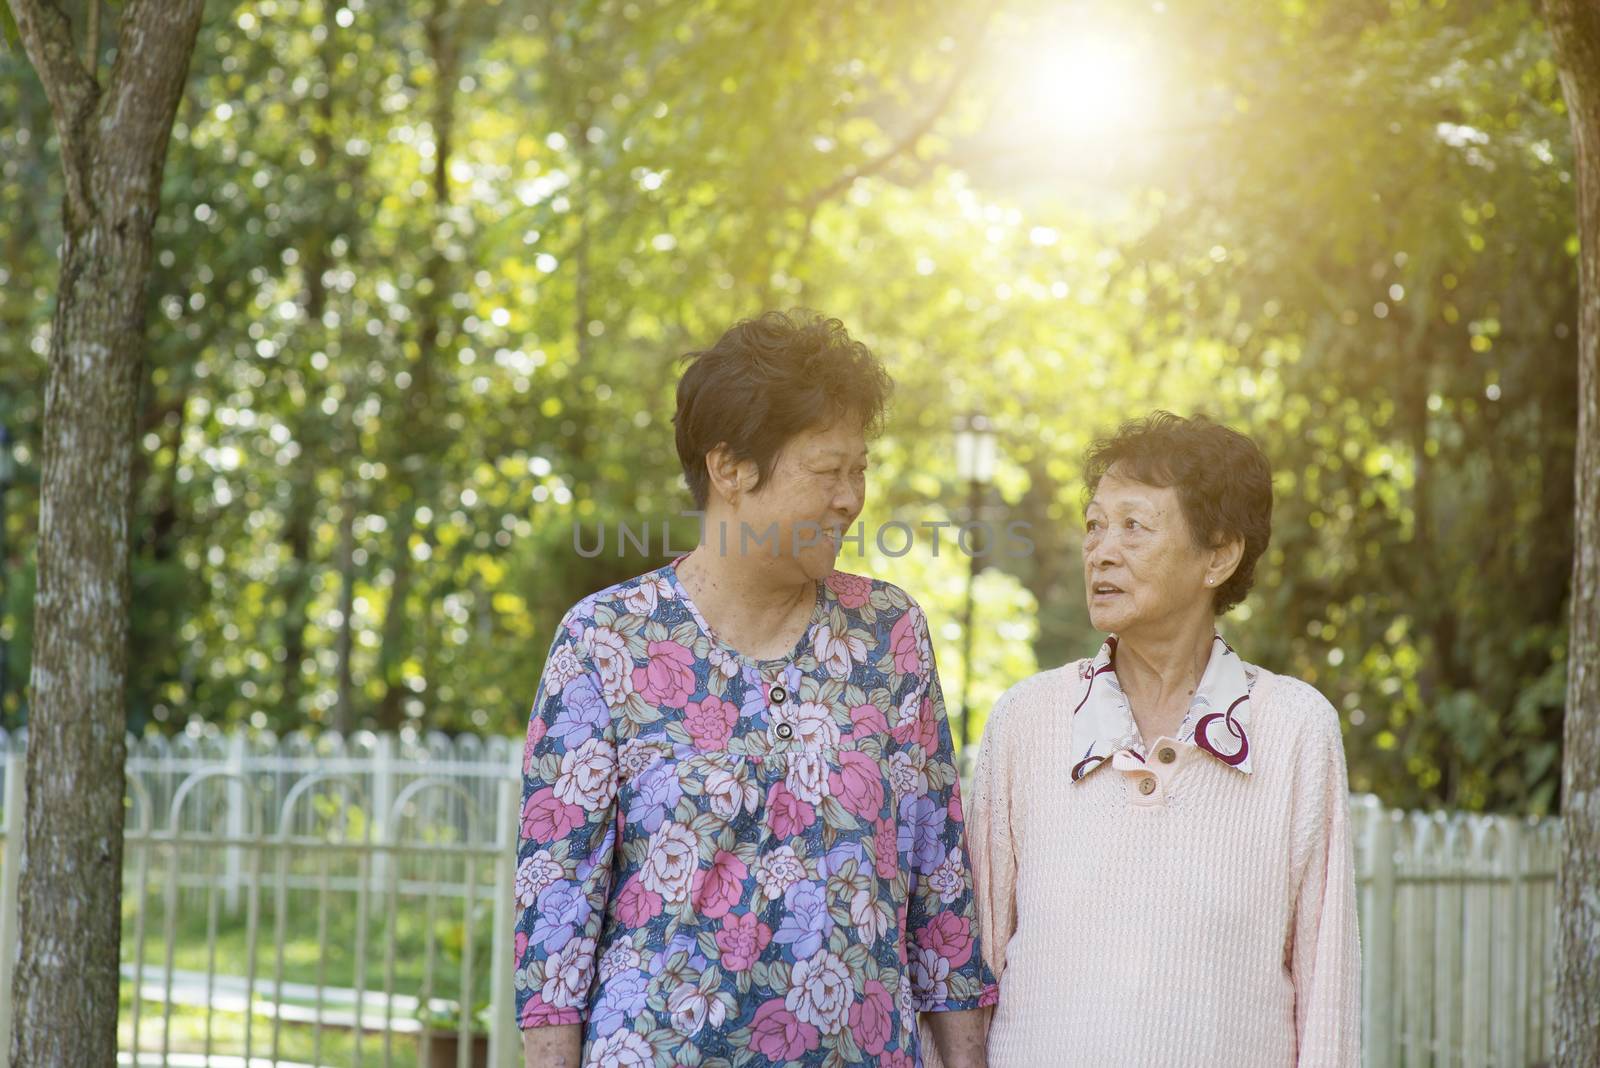 Candid shot of Asian senior adult women walking at outdoor garden park in the morning.